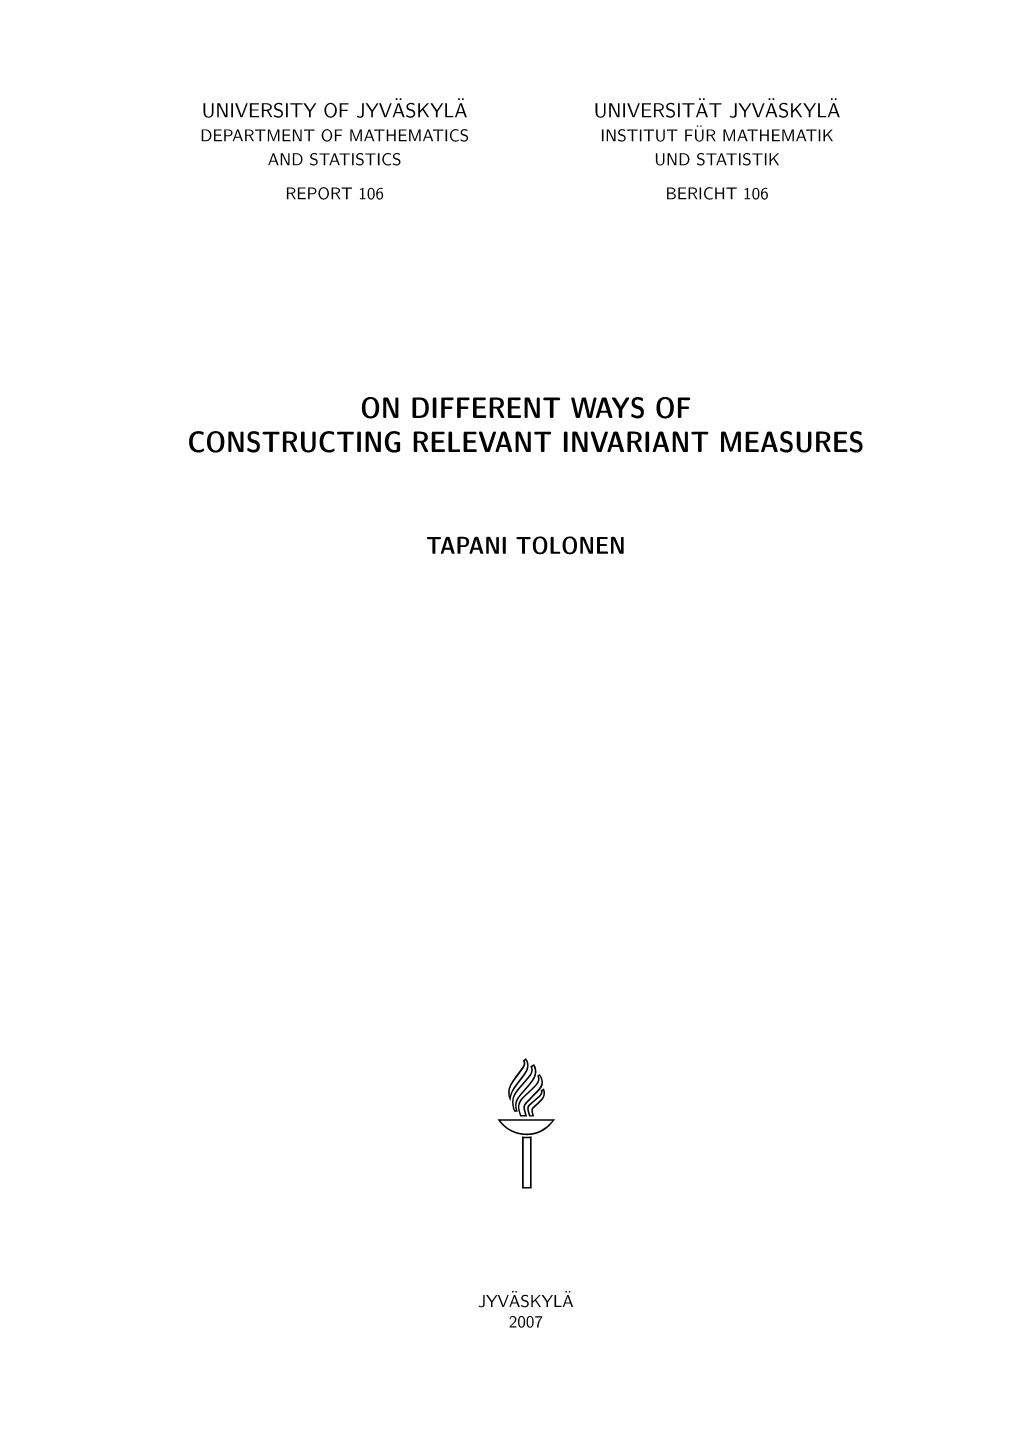 On Different Ways of Constructing Relevant Invariant Measures